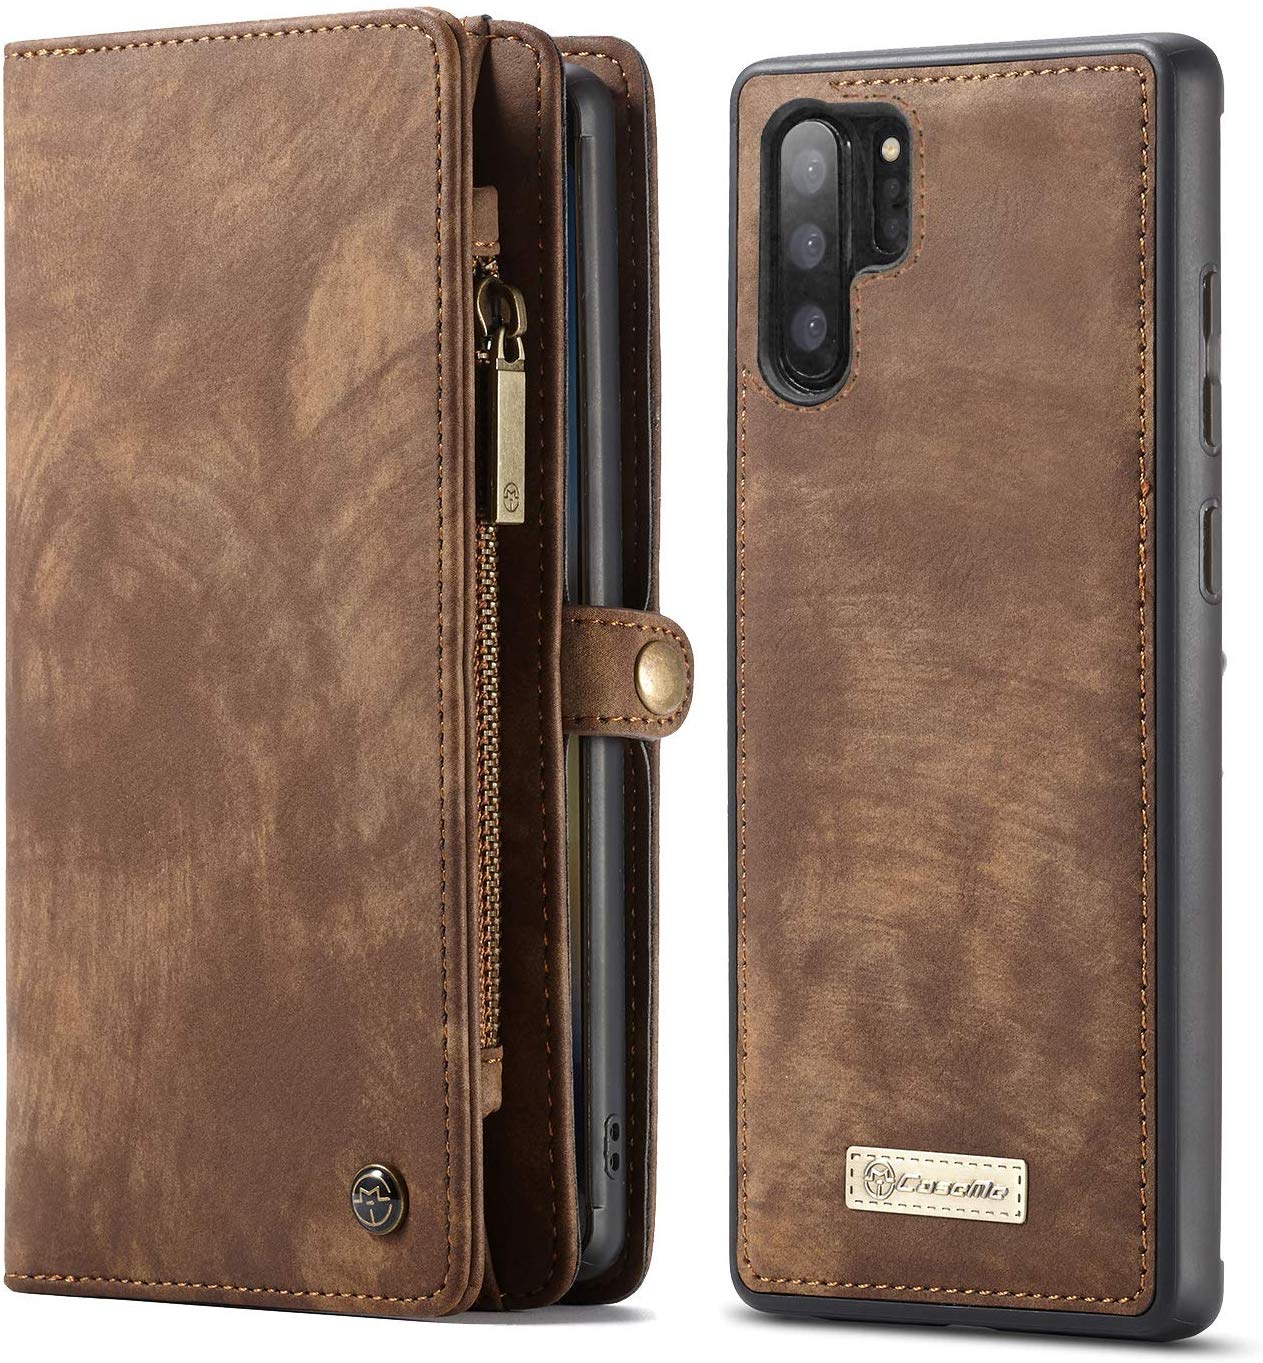 Samsung Galaxy Note 10 Plus full body protection Leather Wallet flip case cover by Excelsior